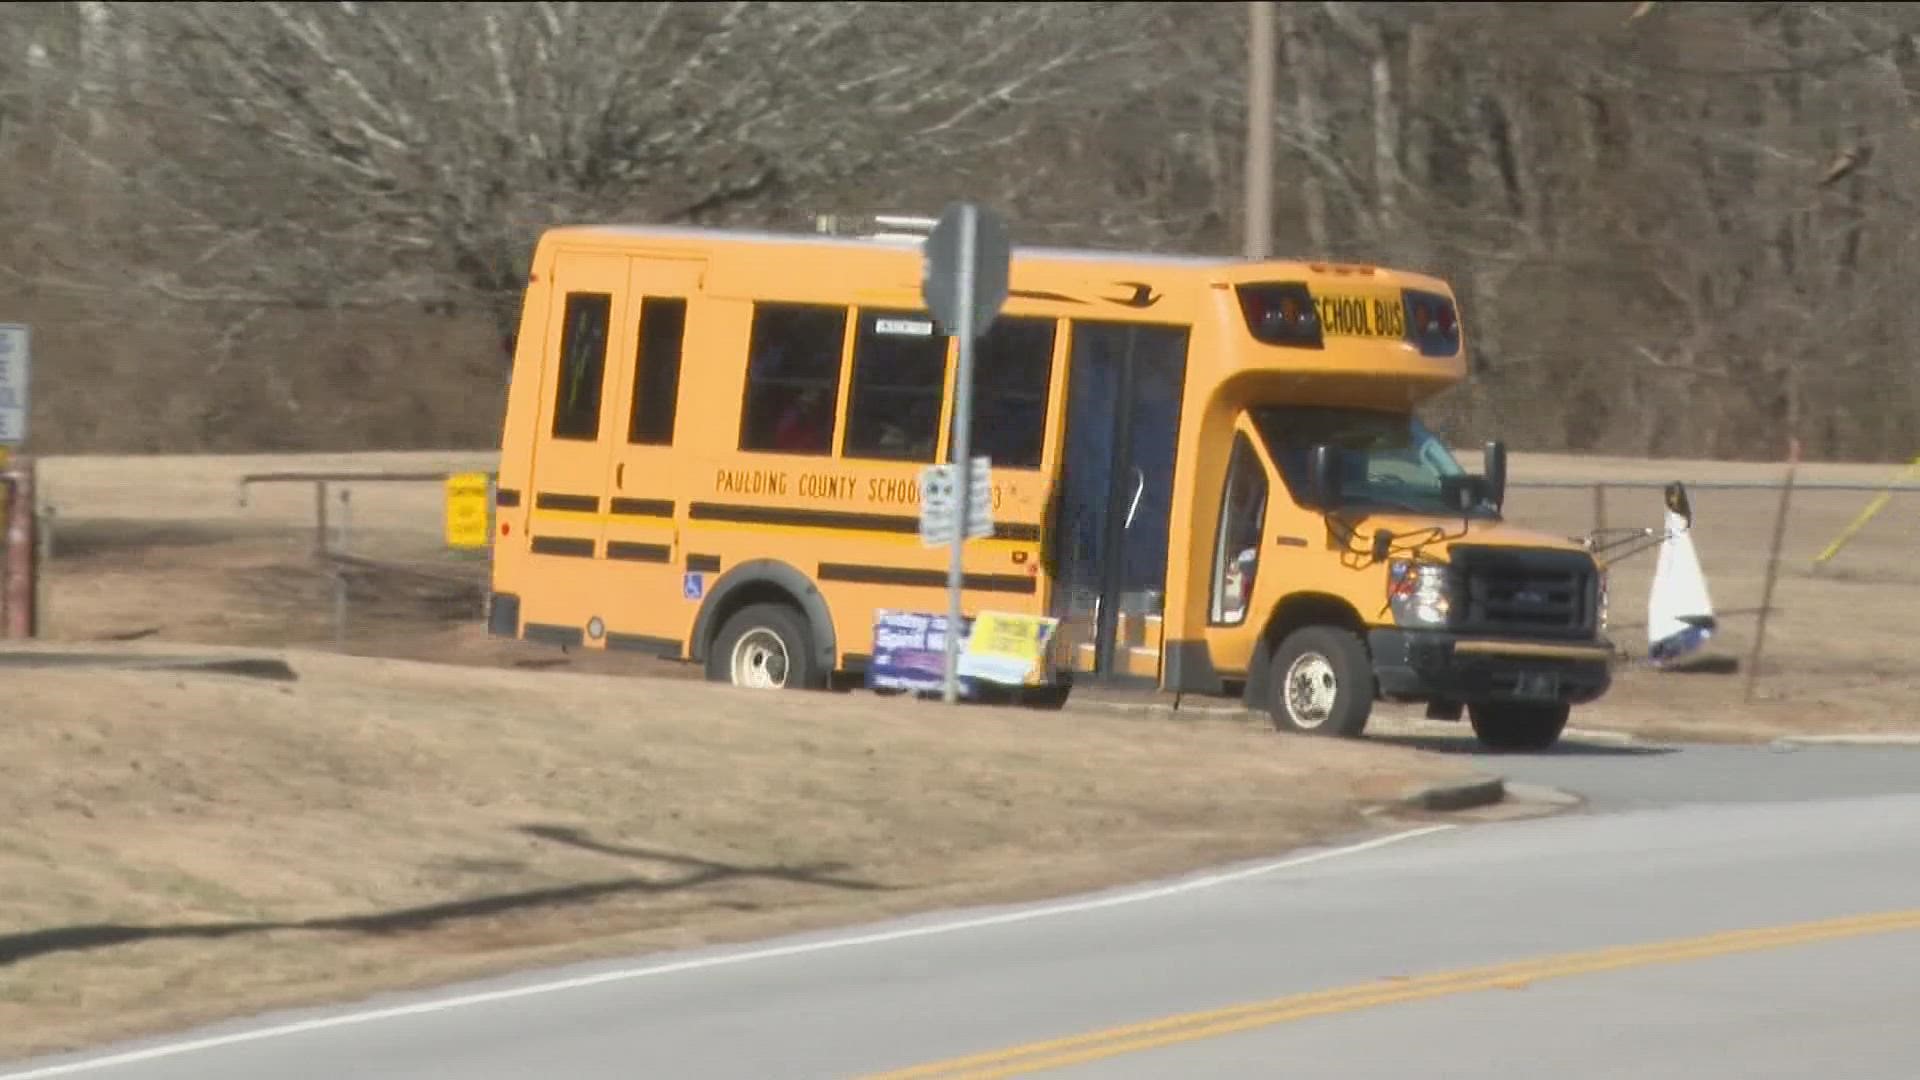 Police said criminal charges could be filed against the parent who slapped the bus driver, but the investigation needed to play out first.